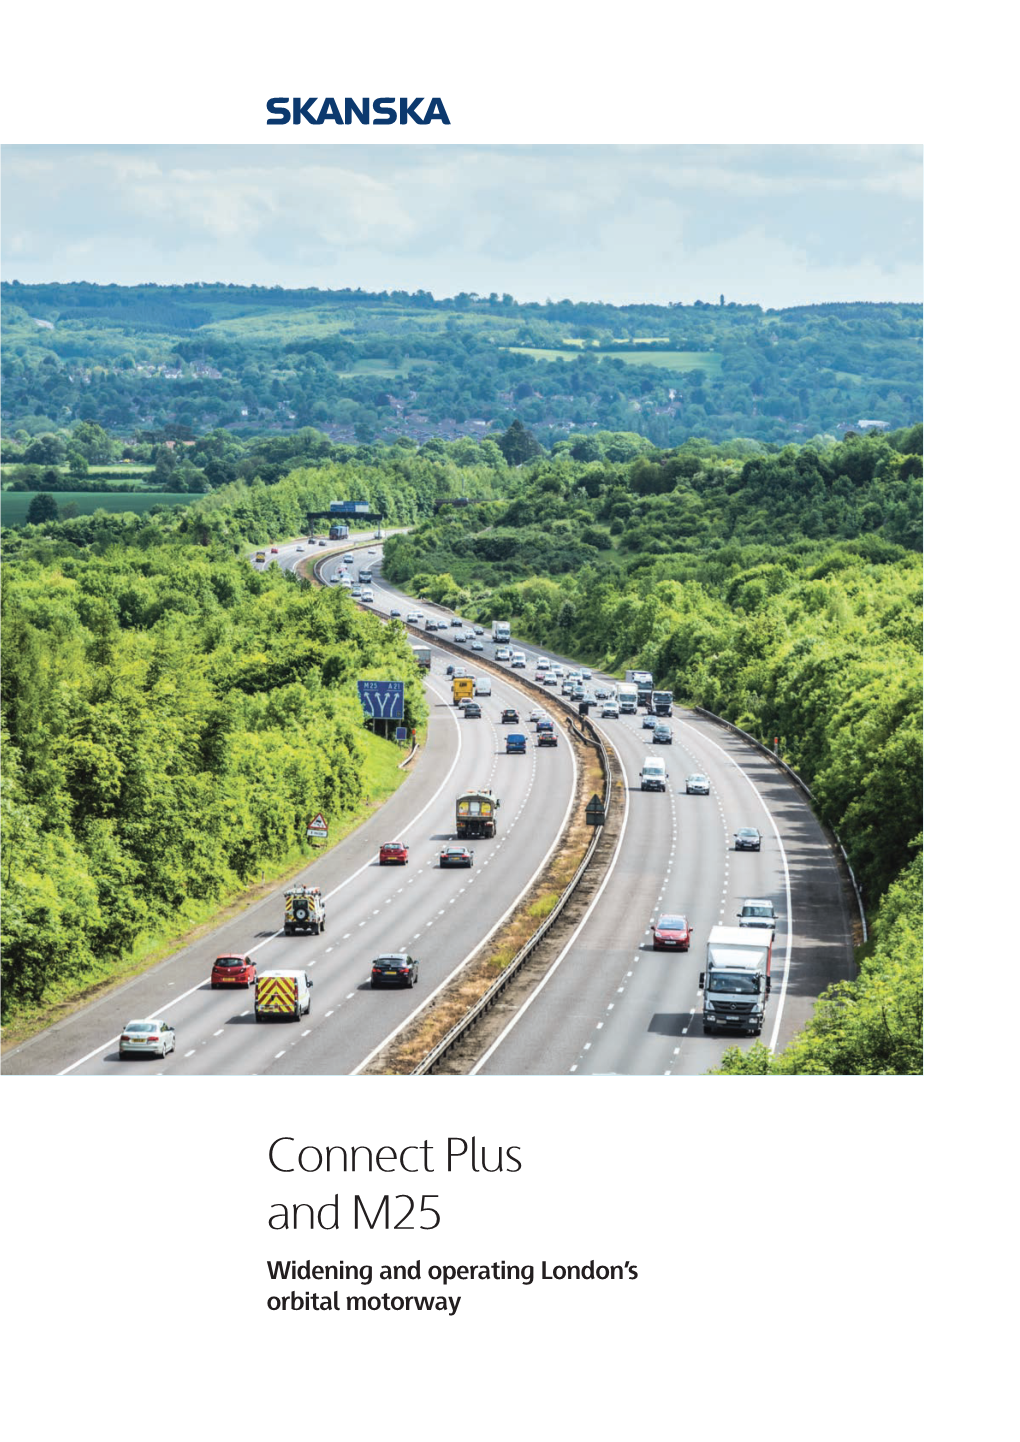 Connect Plus and M25 Widening and Operating London’S Orbital Motorway Connect Plus and the M25 | Widening and Operating London’S Orbital Motorway Overview